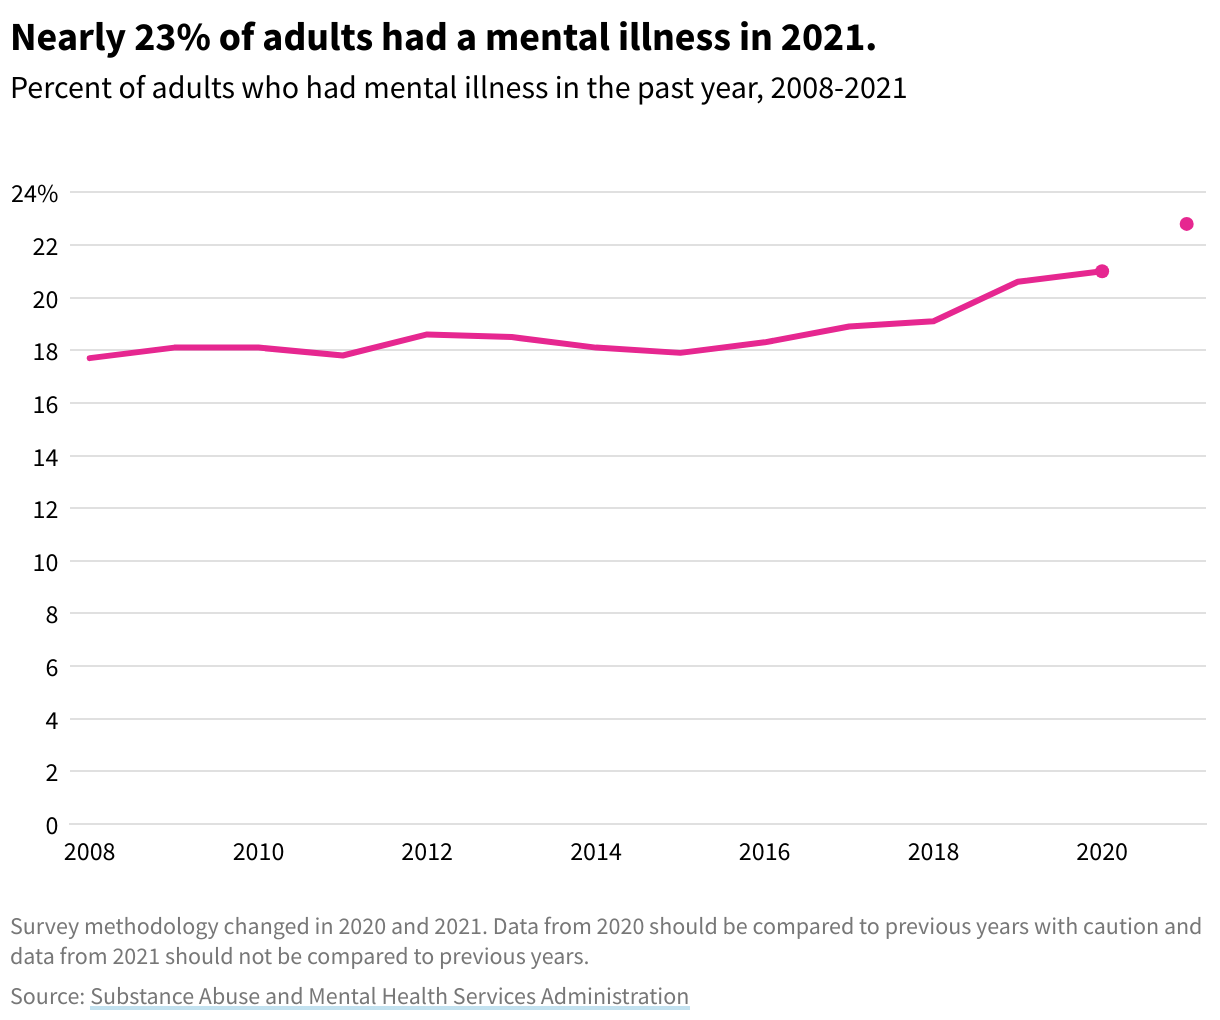 Line graph showing percent of adults who had mental illnesses, with a peak in 2021 of nearly 23%